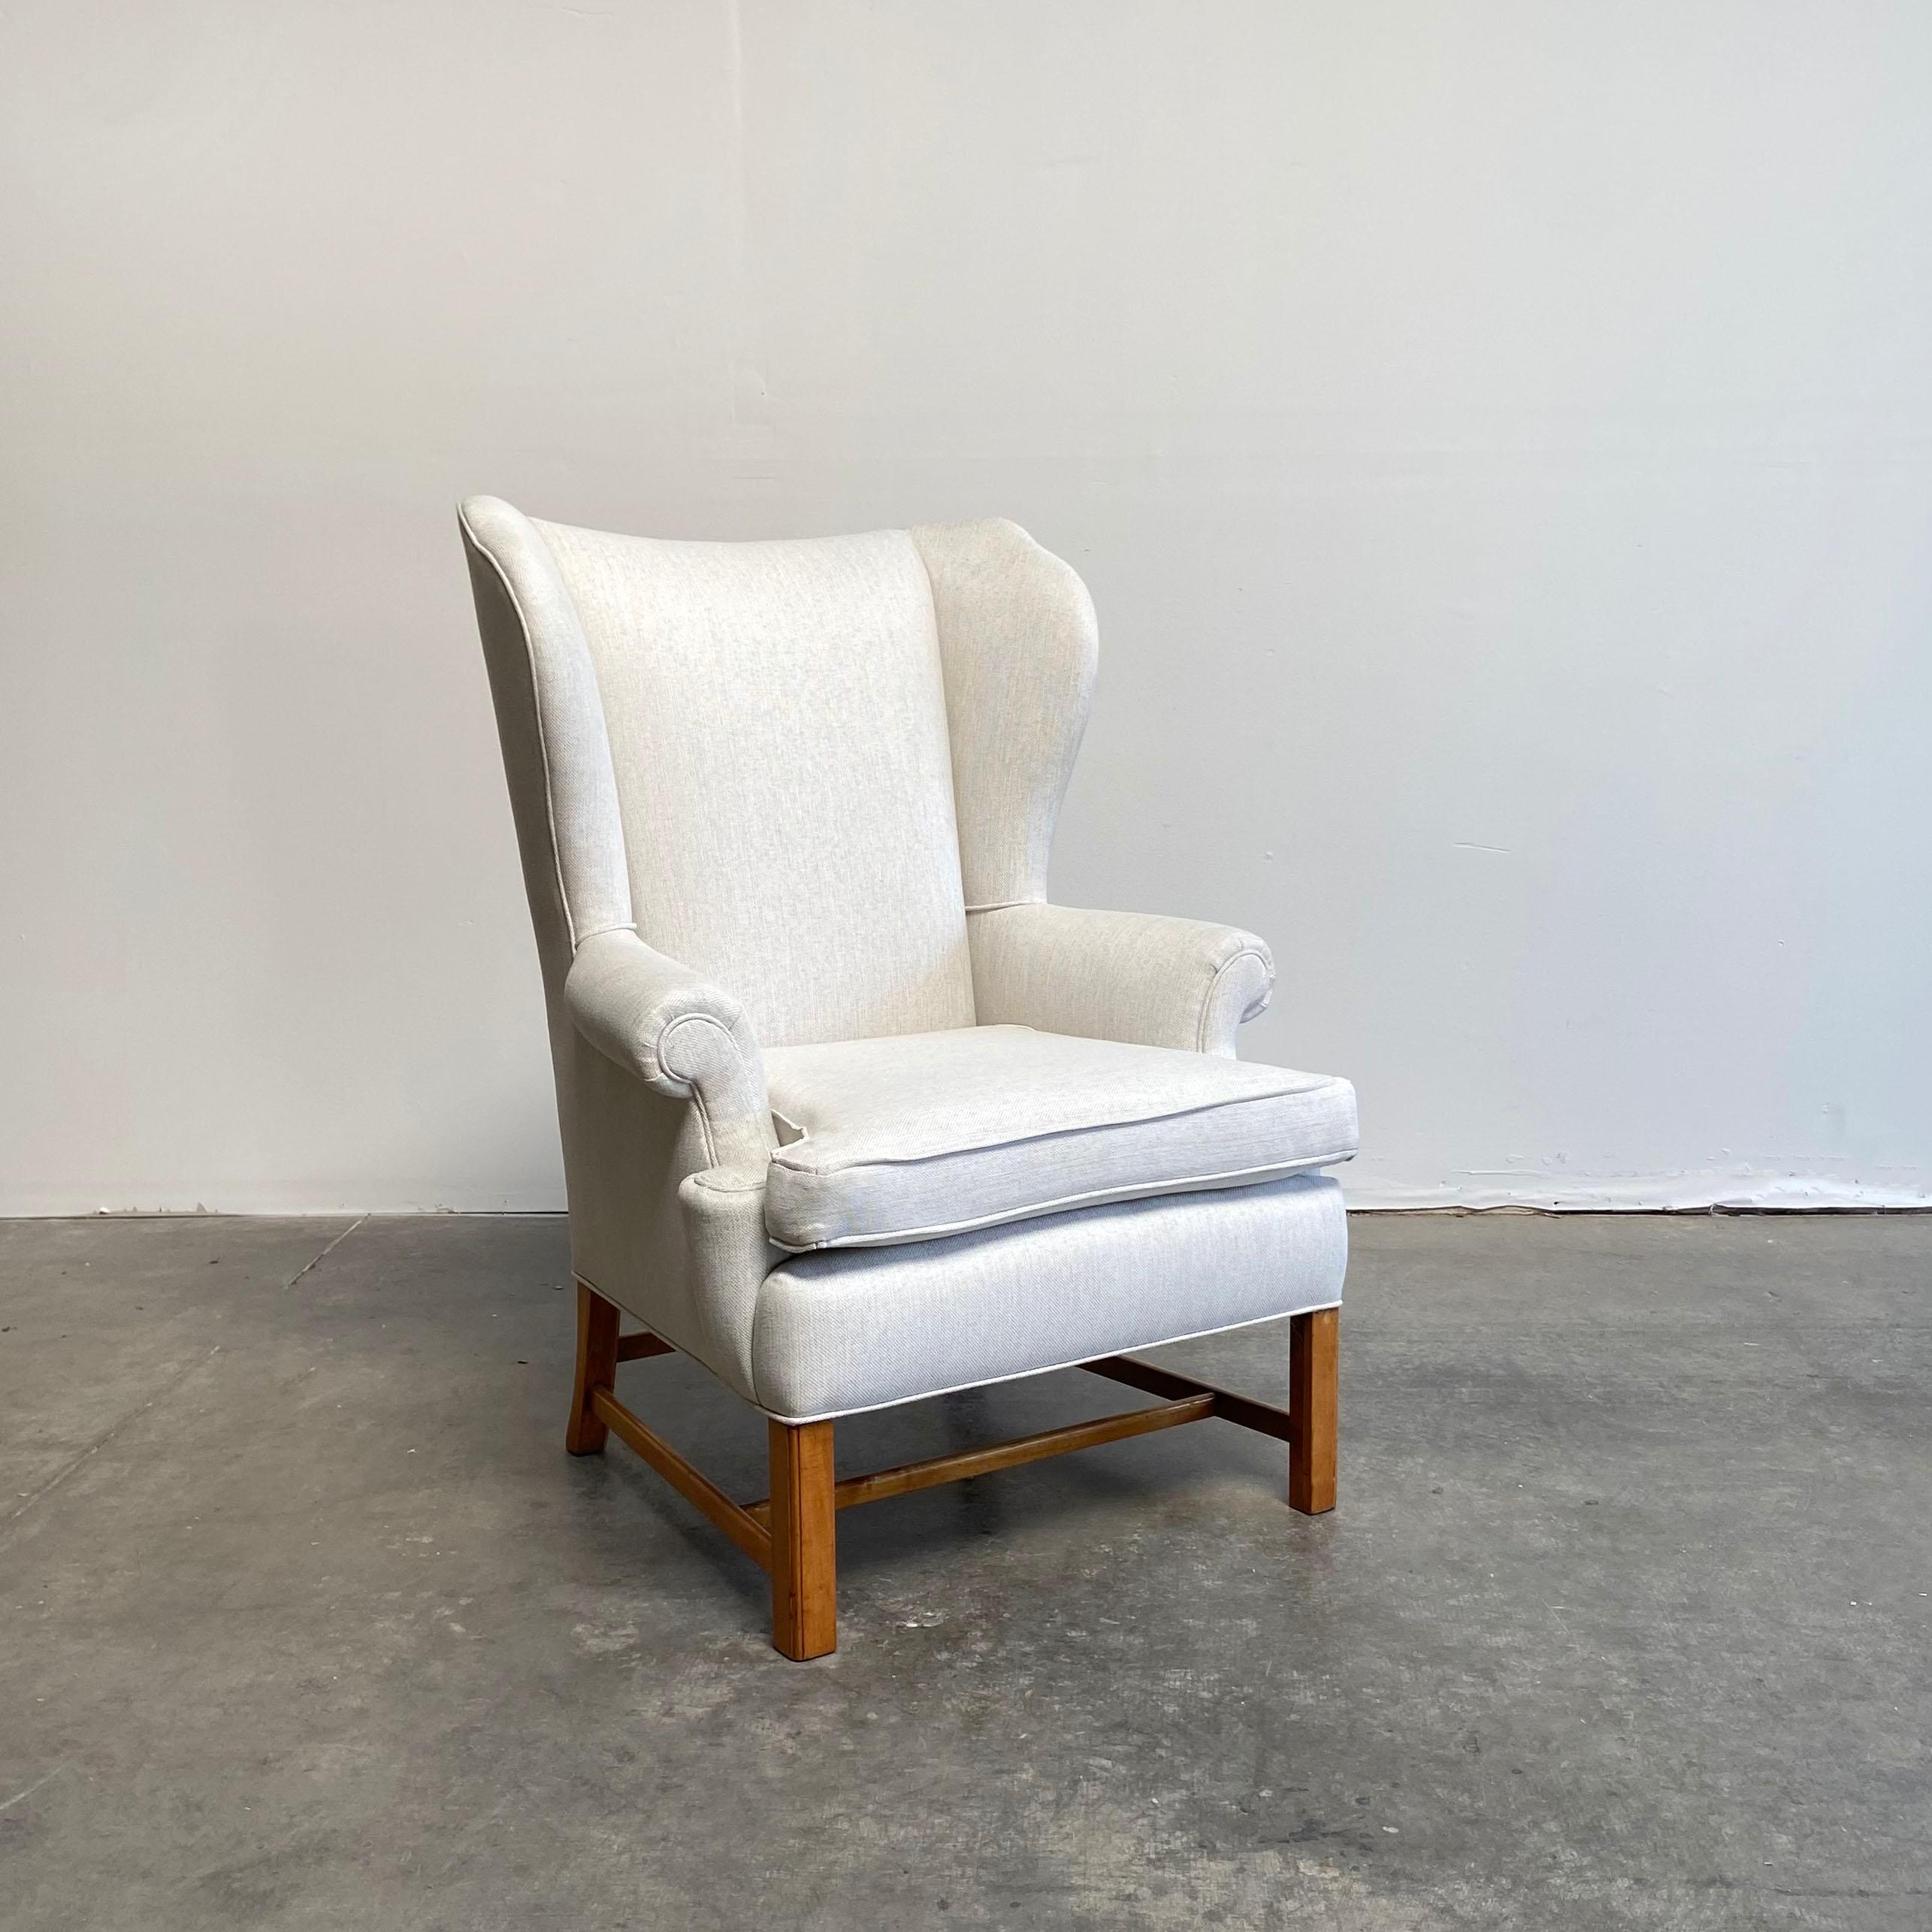 Vintage wing chair with new upholstery.
Size: 30” W x 31” D x 42” H
Seat height 19”
Seat depth 19”
Arm height 24”
Upholstery is in a linen blend, light natural color. Seat is a foam in medium density.